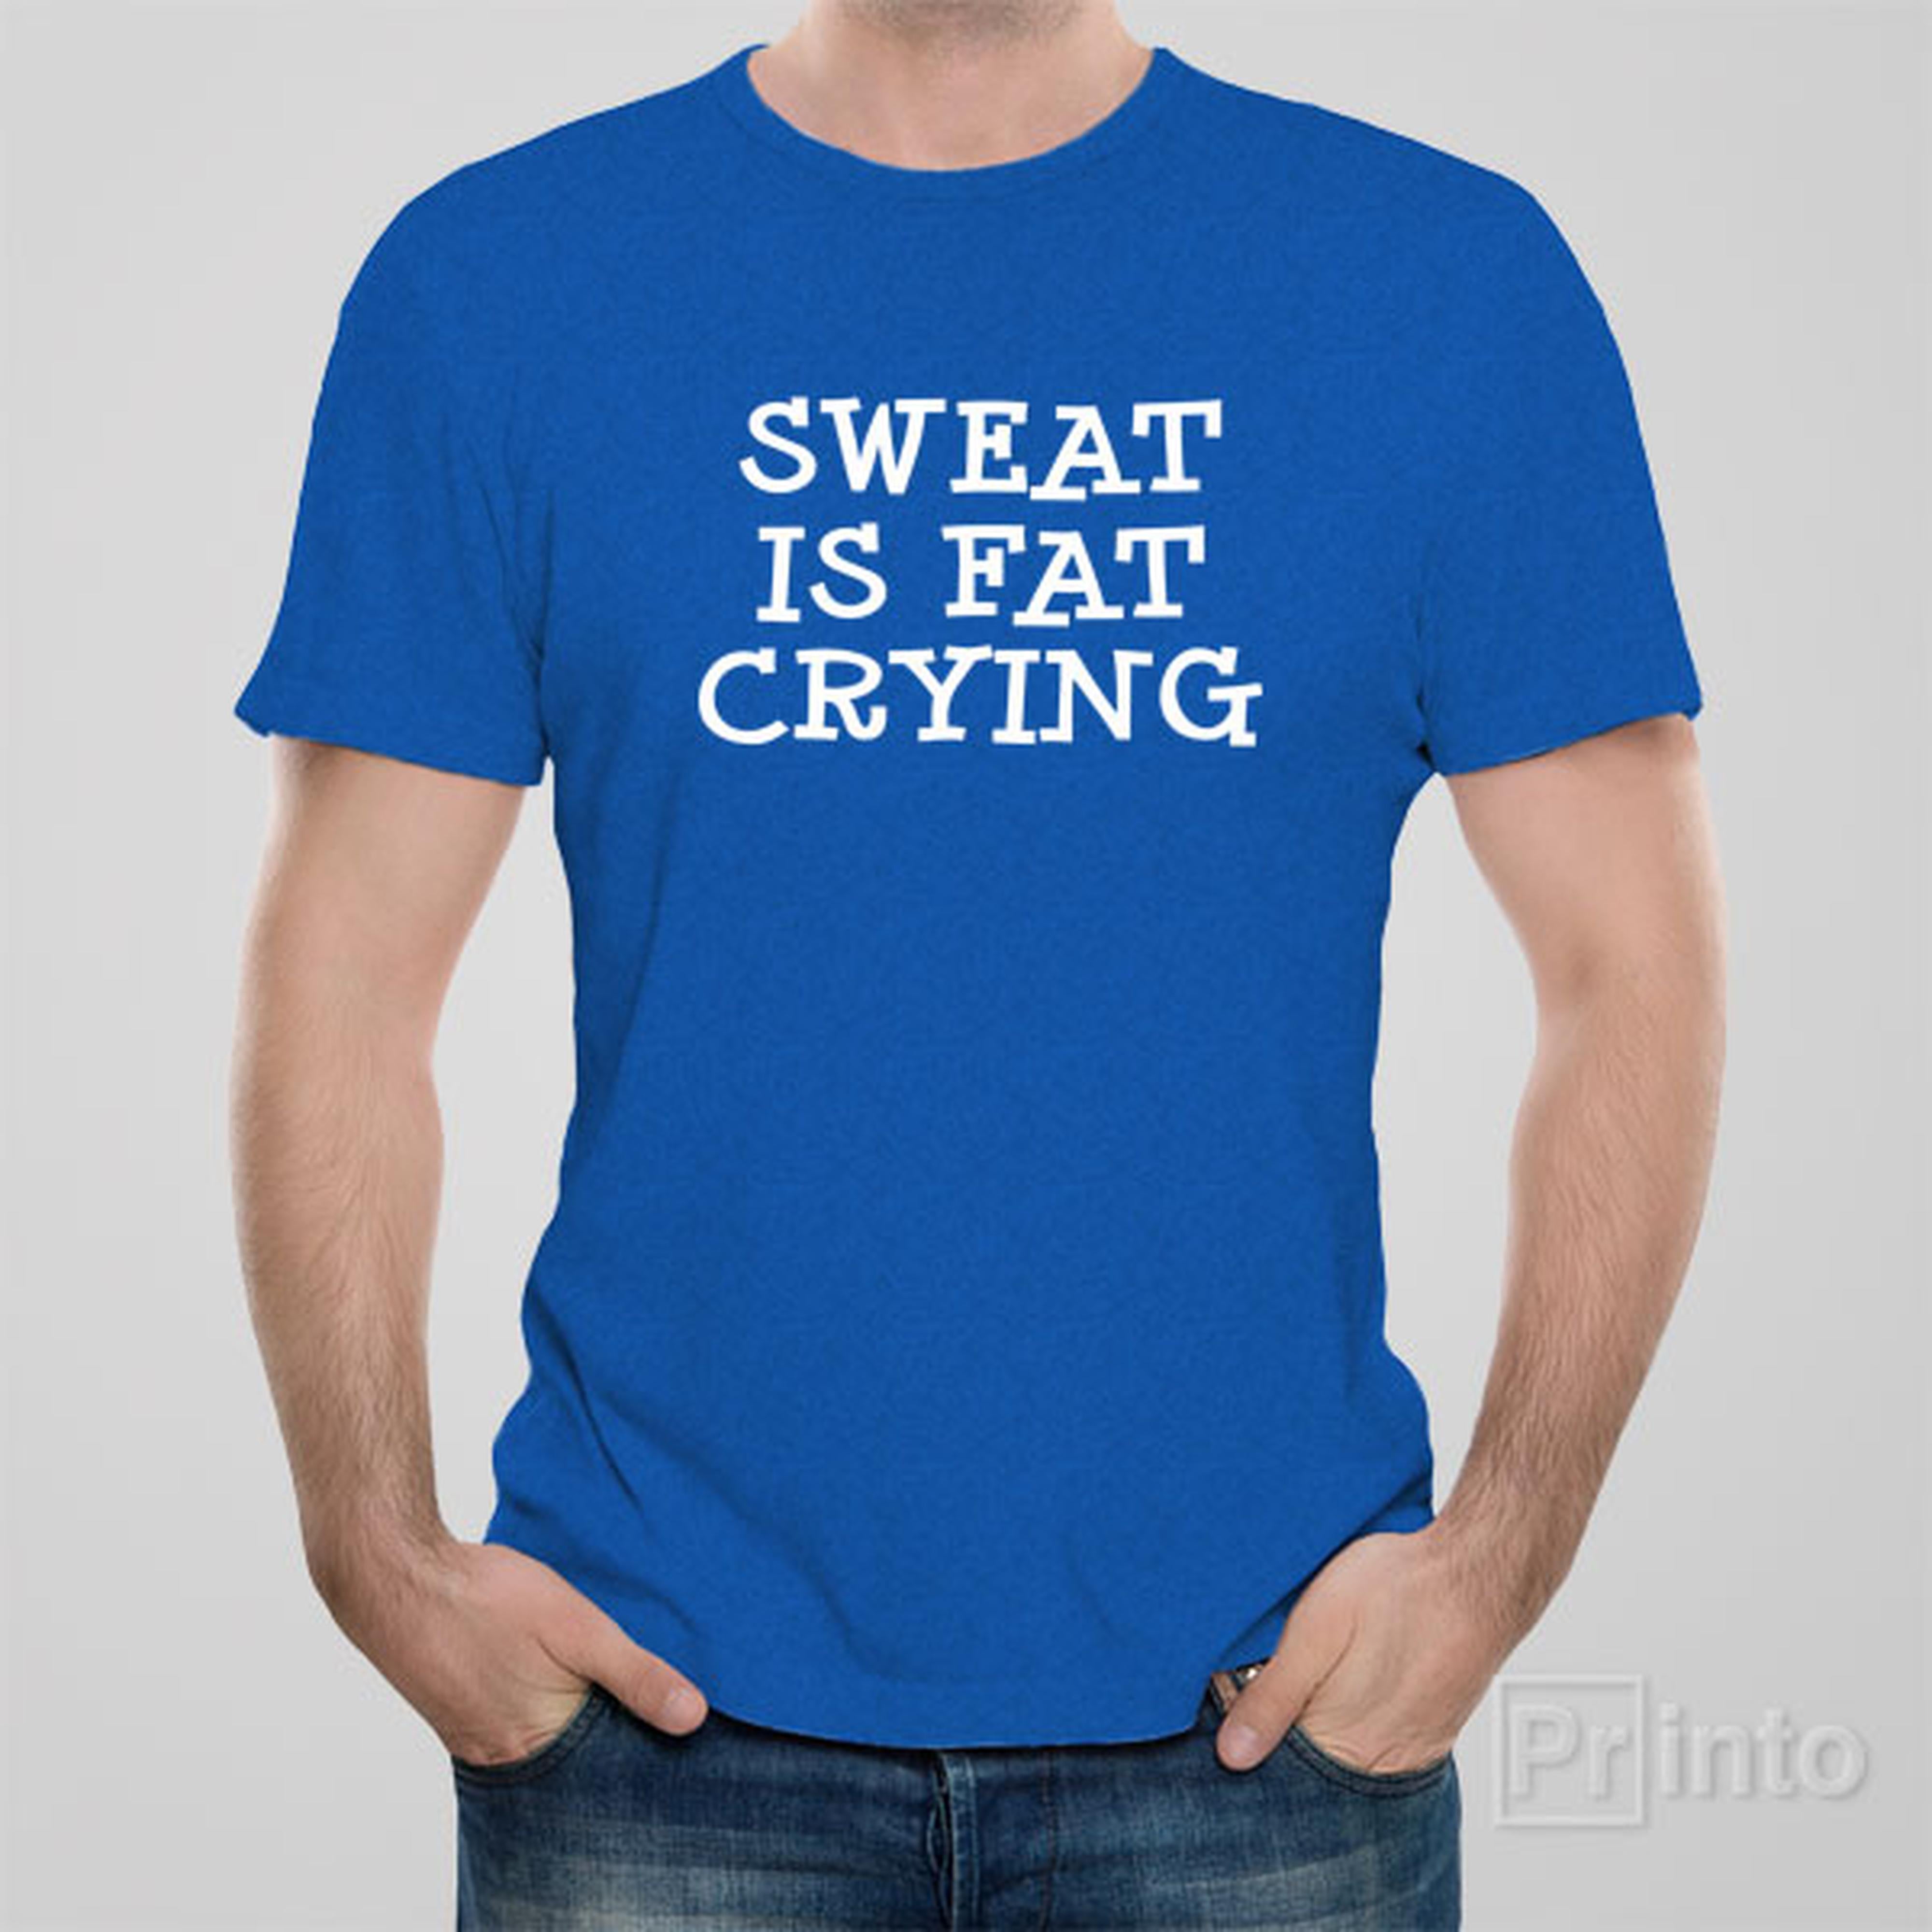 sweat-is-fat-crying-t-shirt